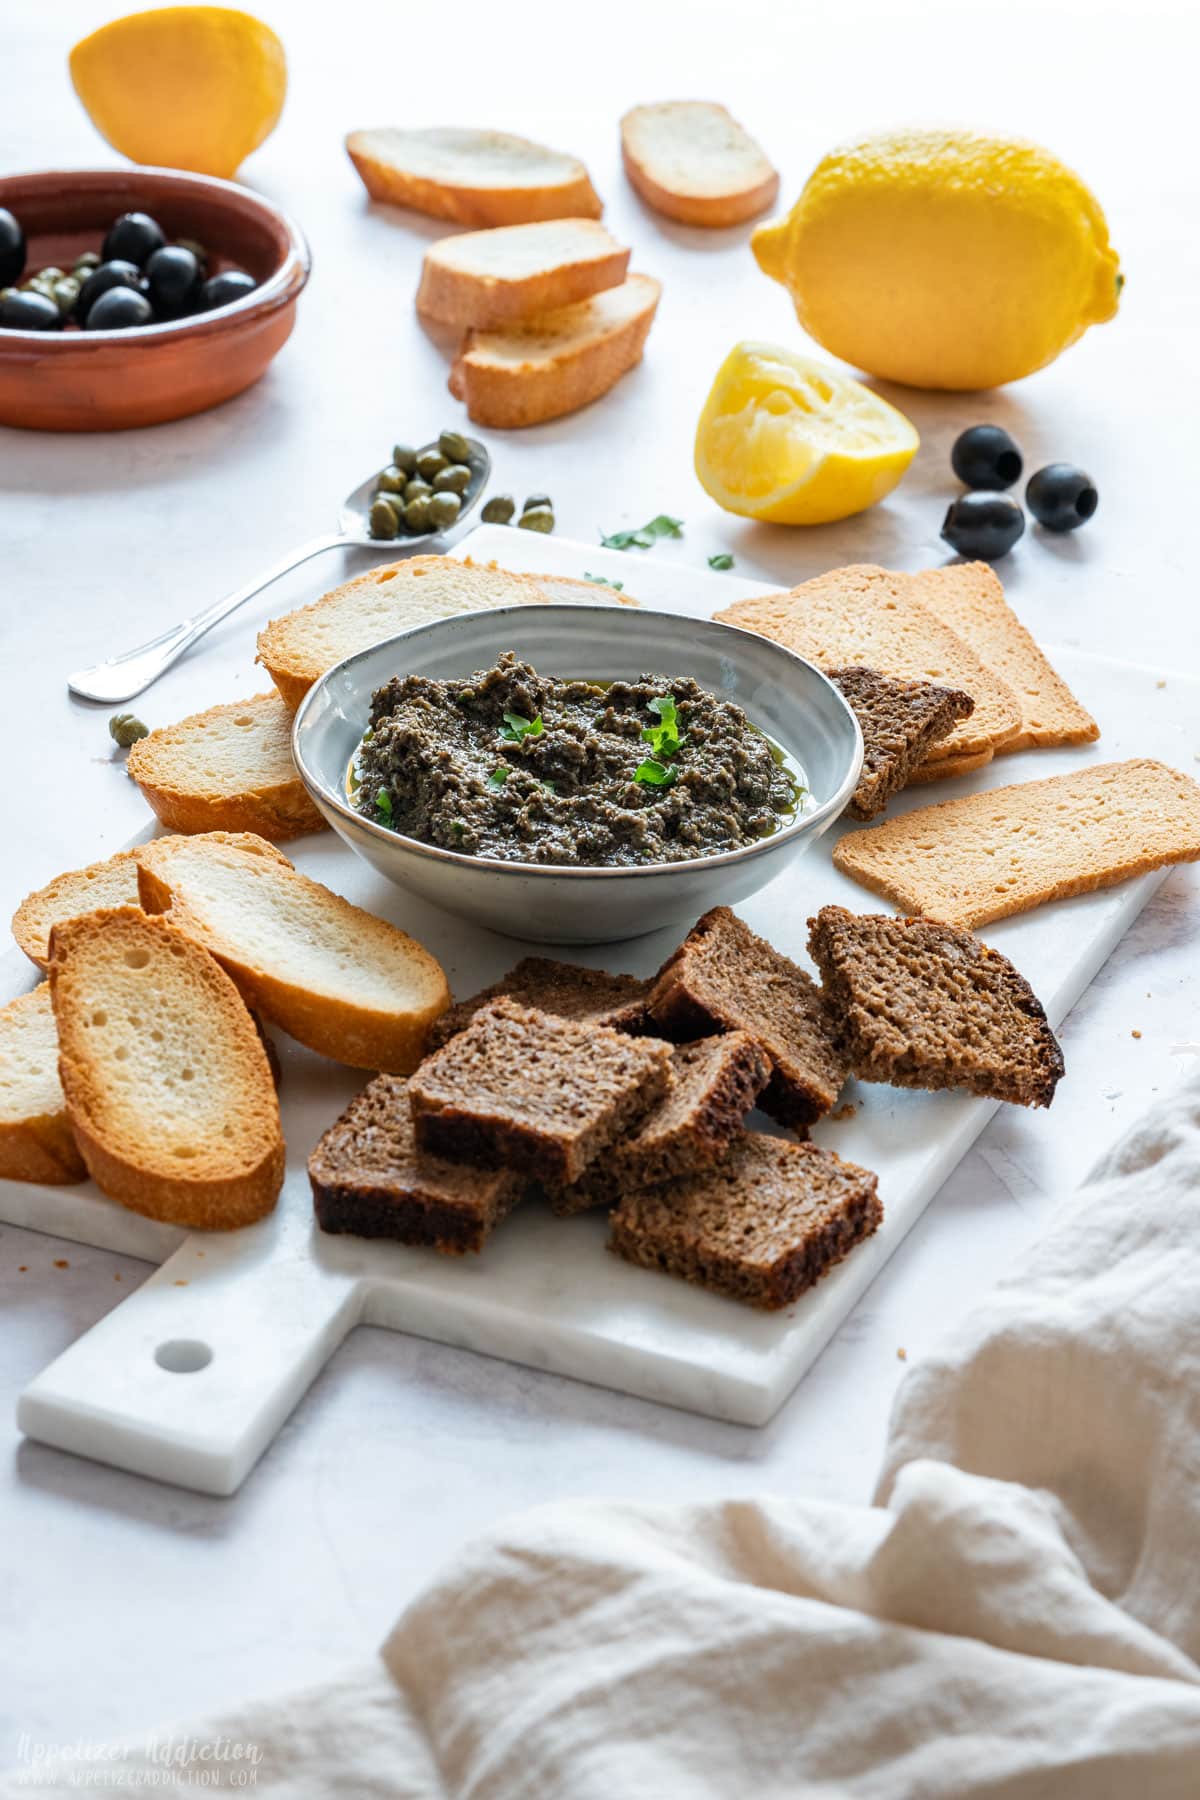 Beautifully arranged various breads and bowl of olive tapenade.